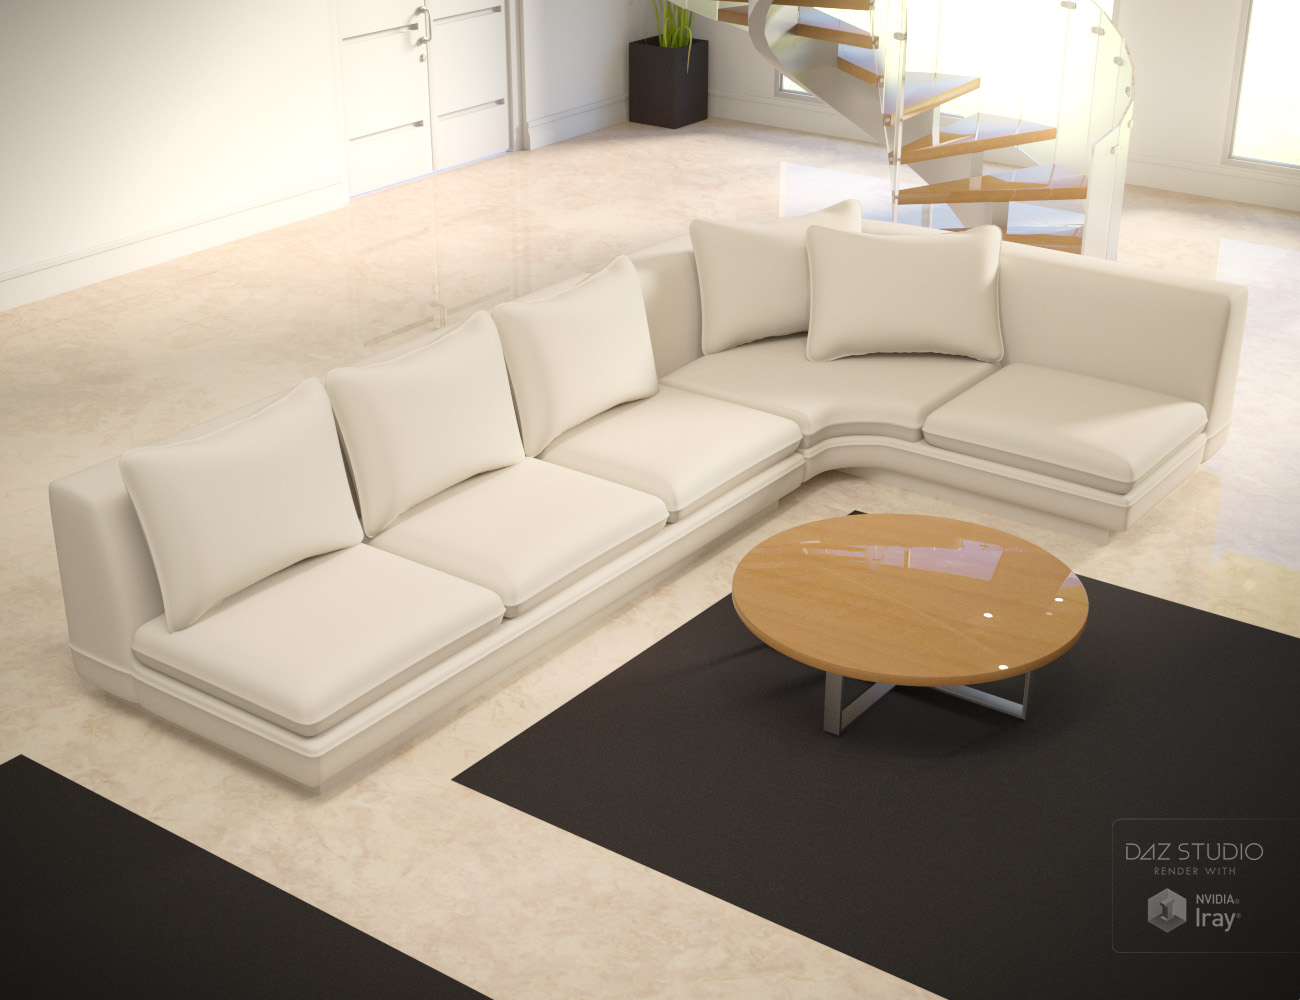 Upscale Apartment by: Val3dart, 3D Models by Daz 3D